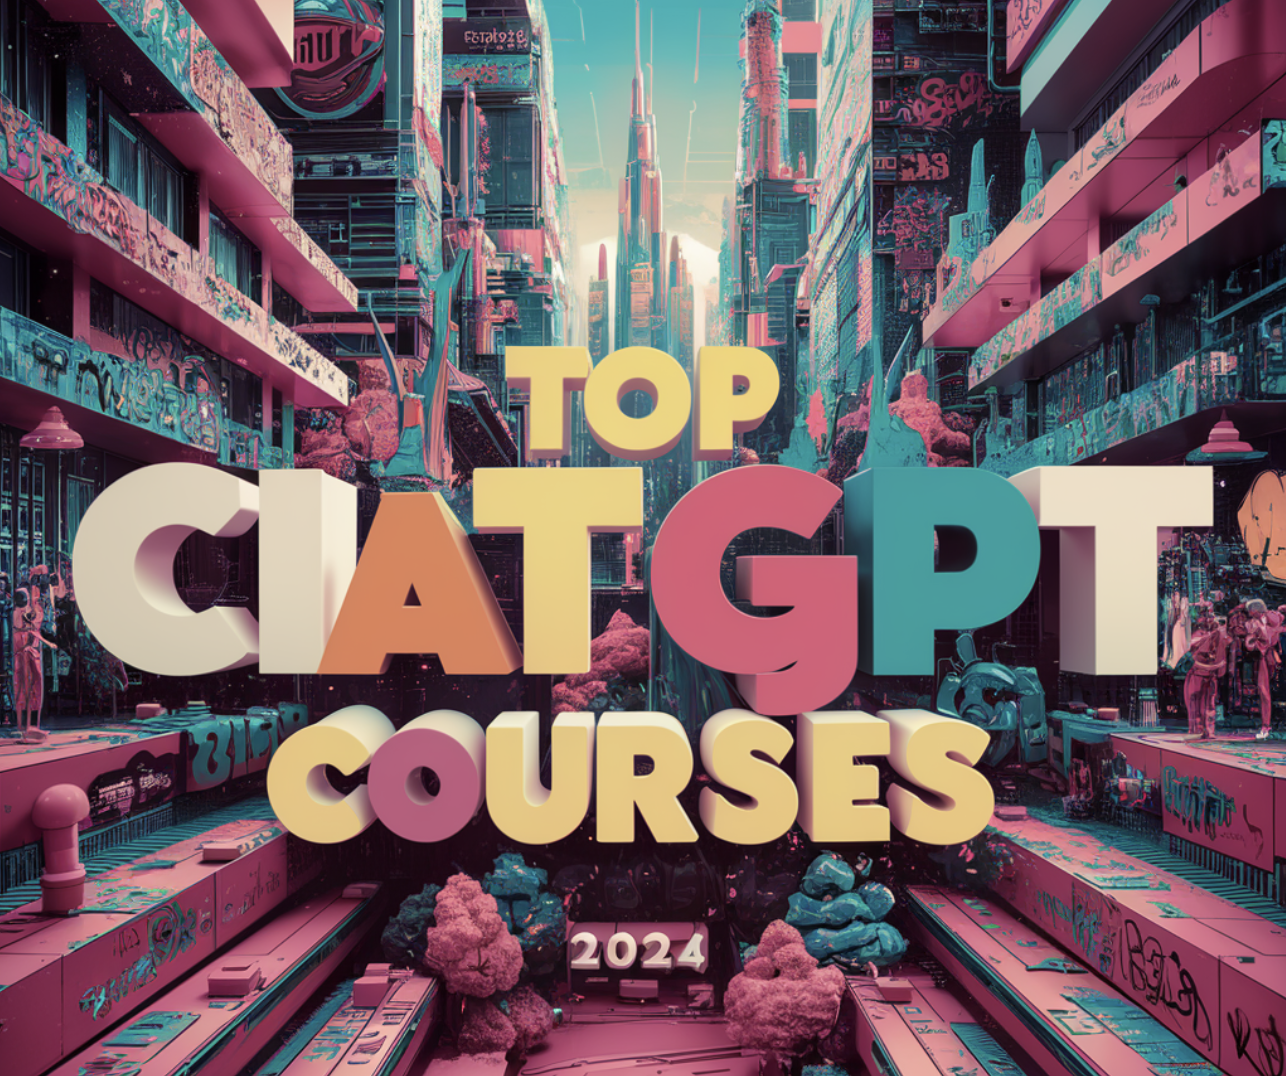 Top ChatGPT Courses in 2024